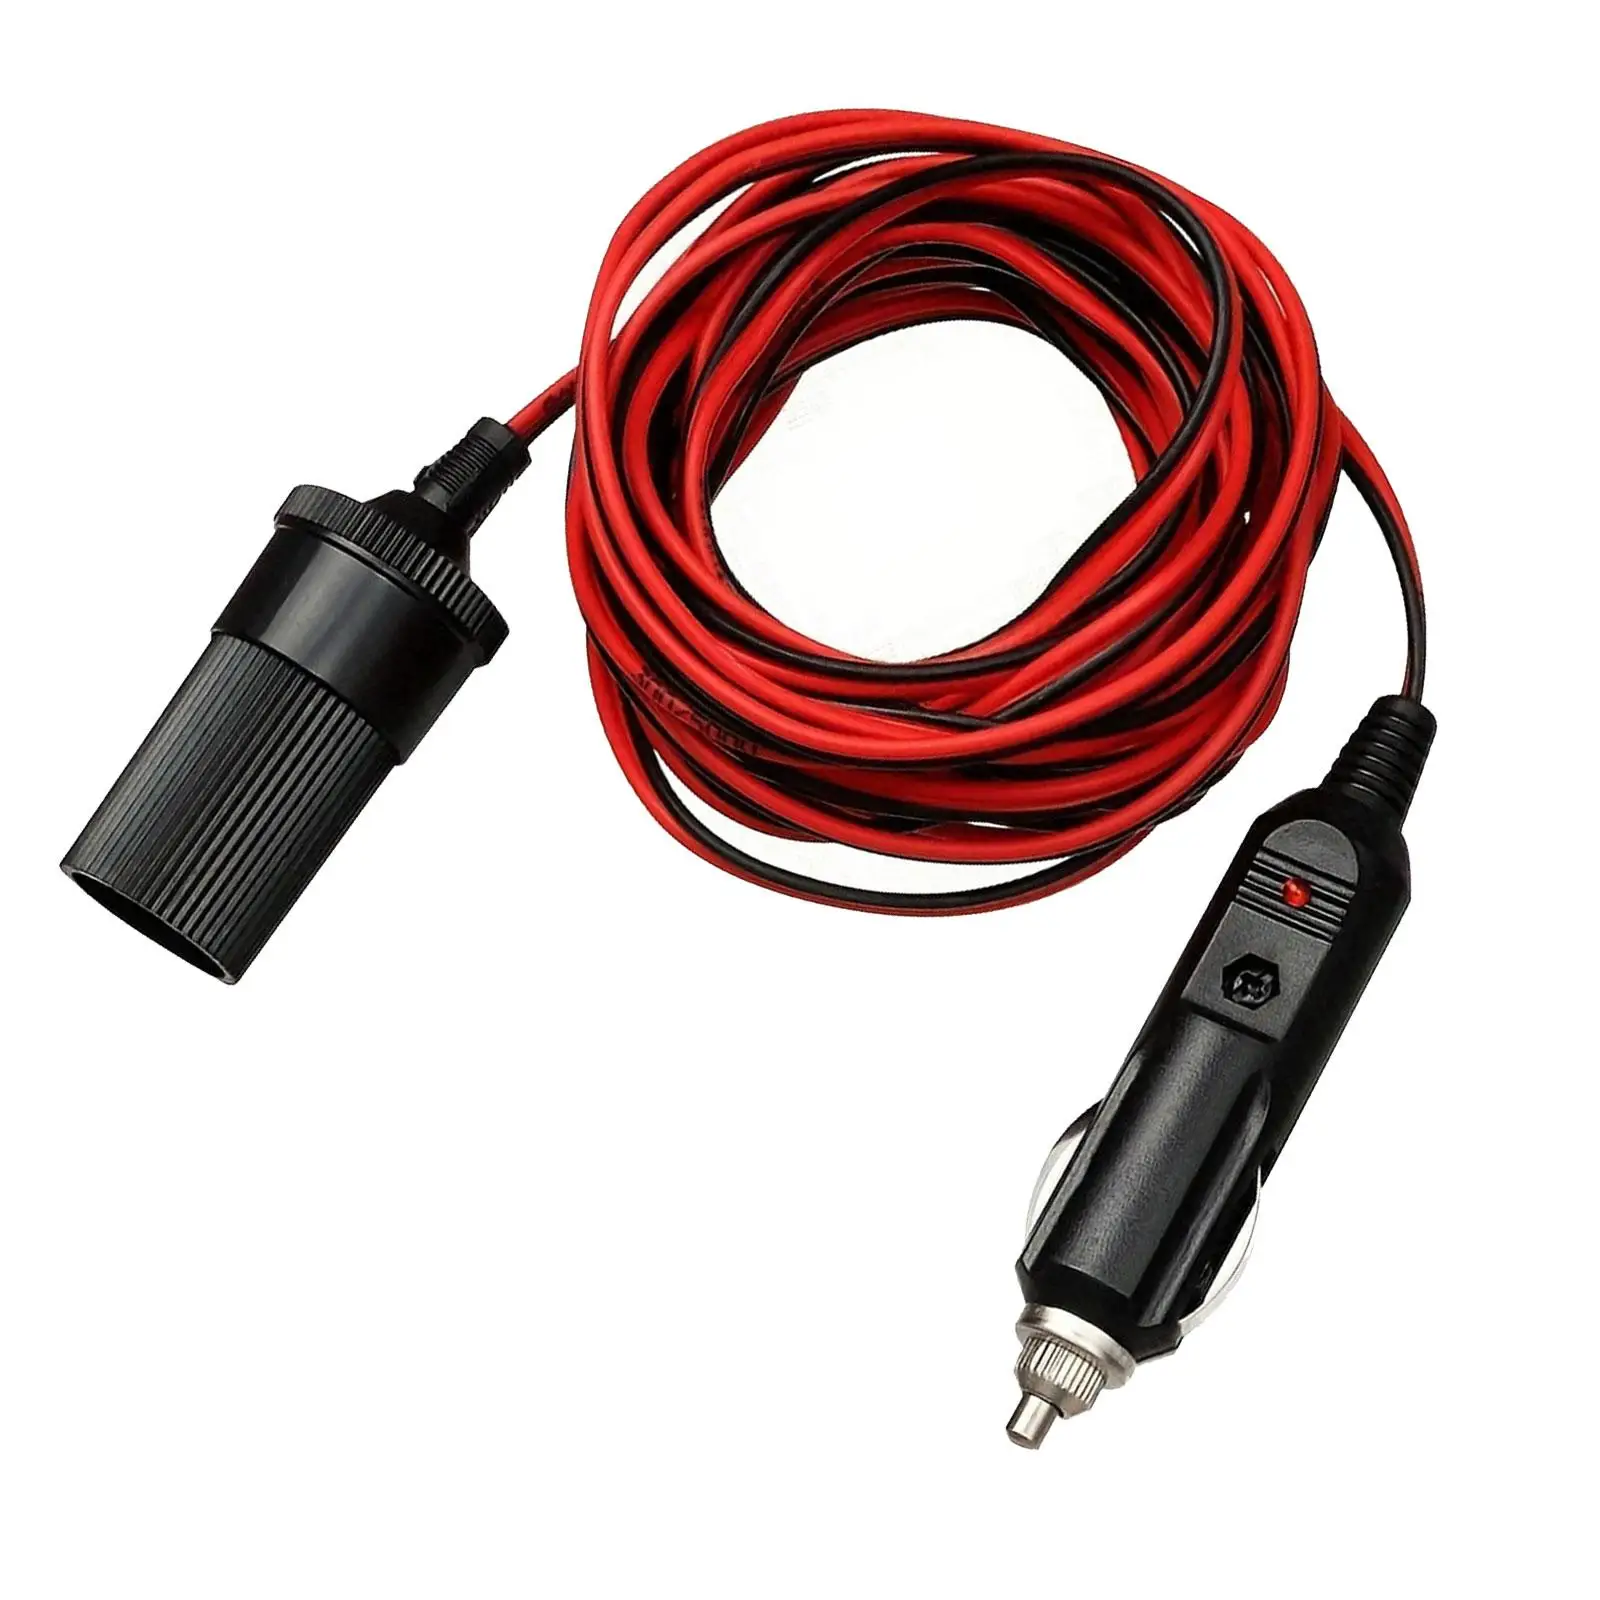 Car Cigarette Lighter Plug Extension Cable Red and Black Lines Charger